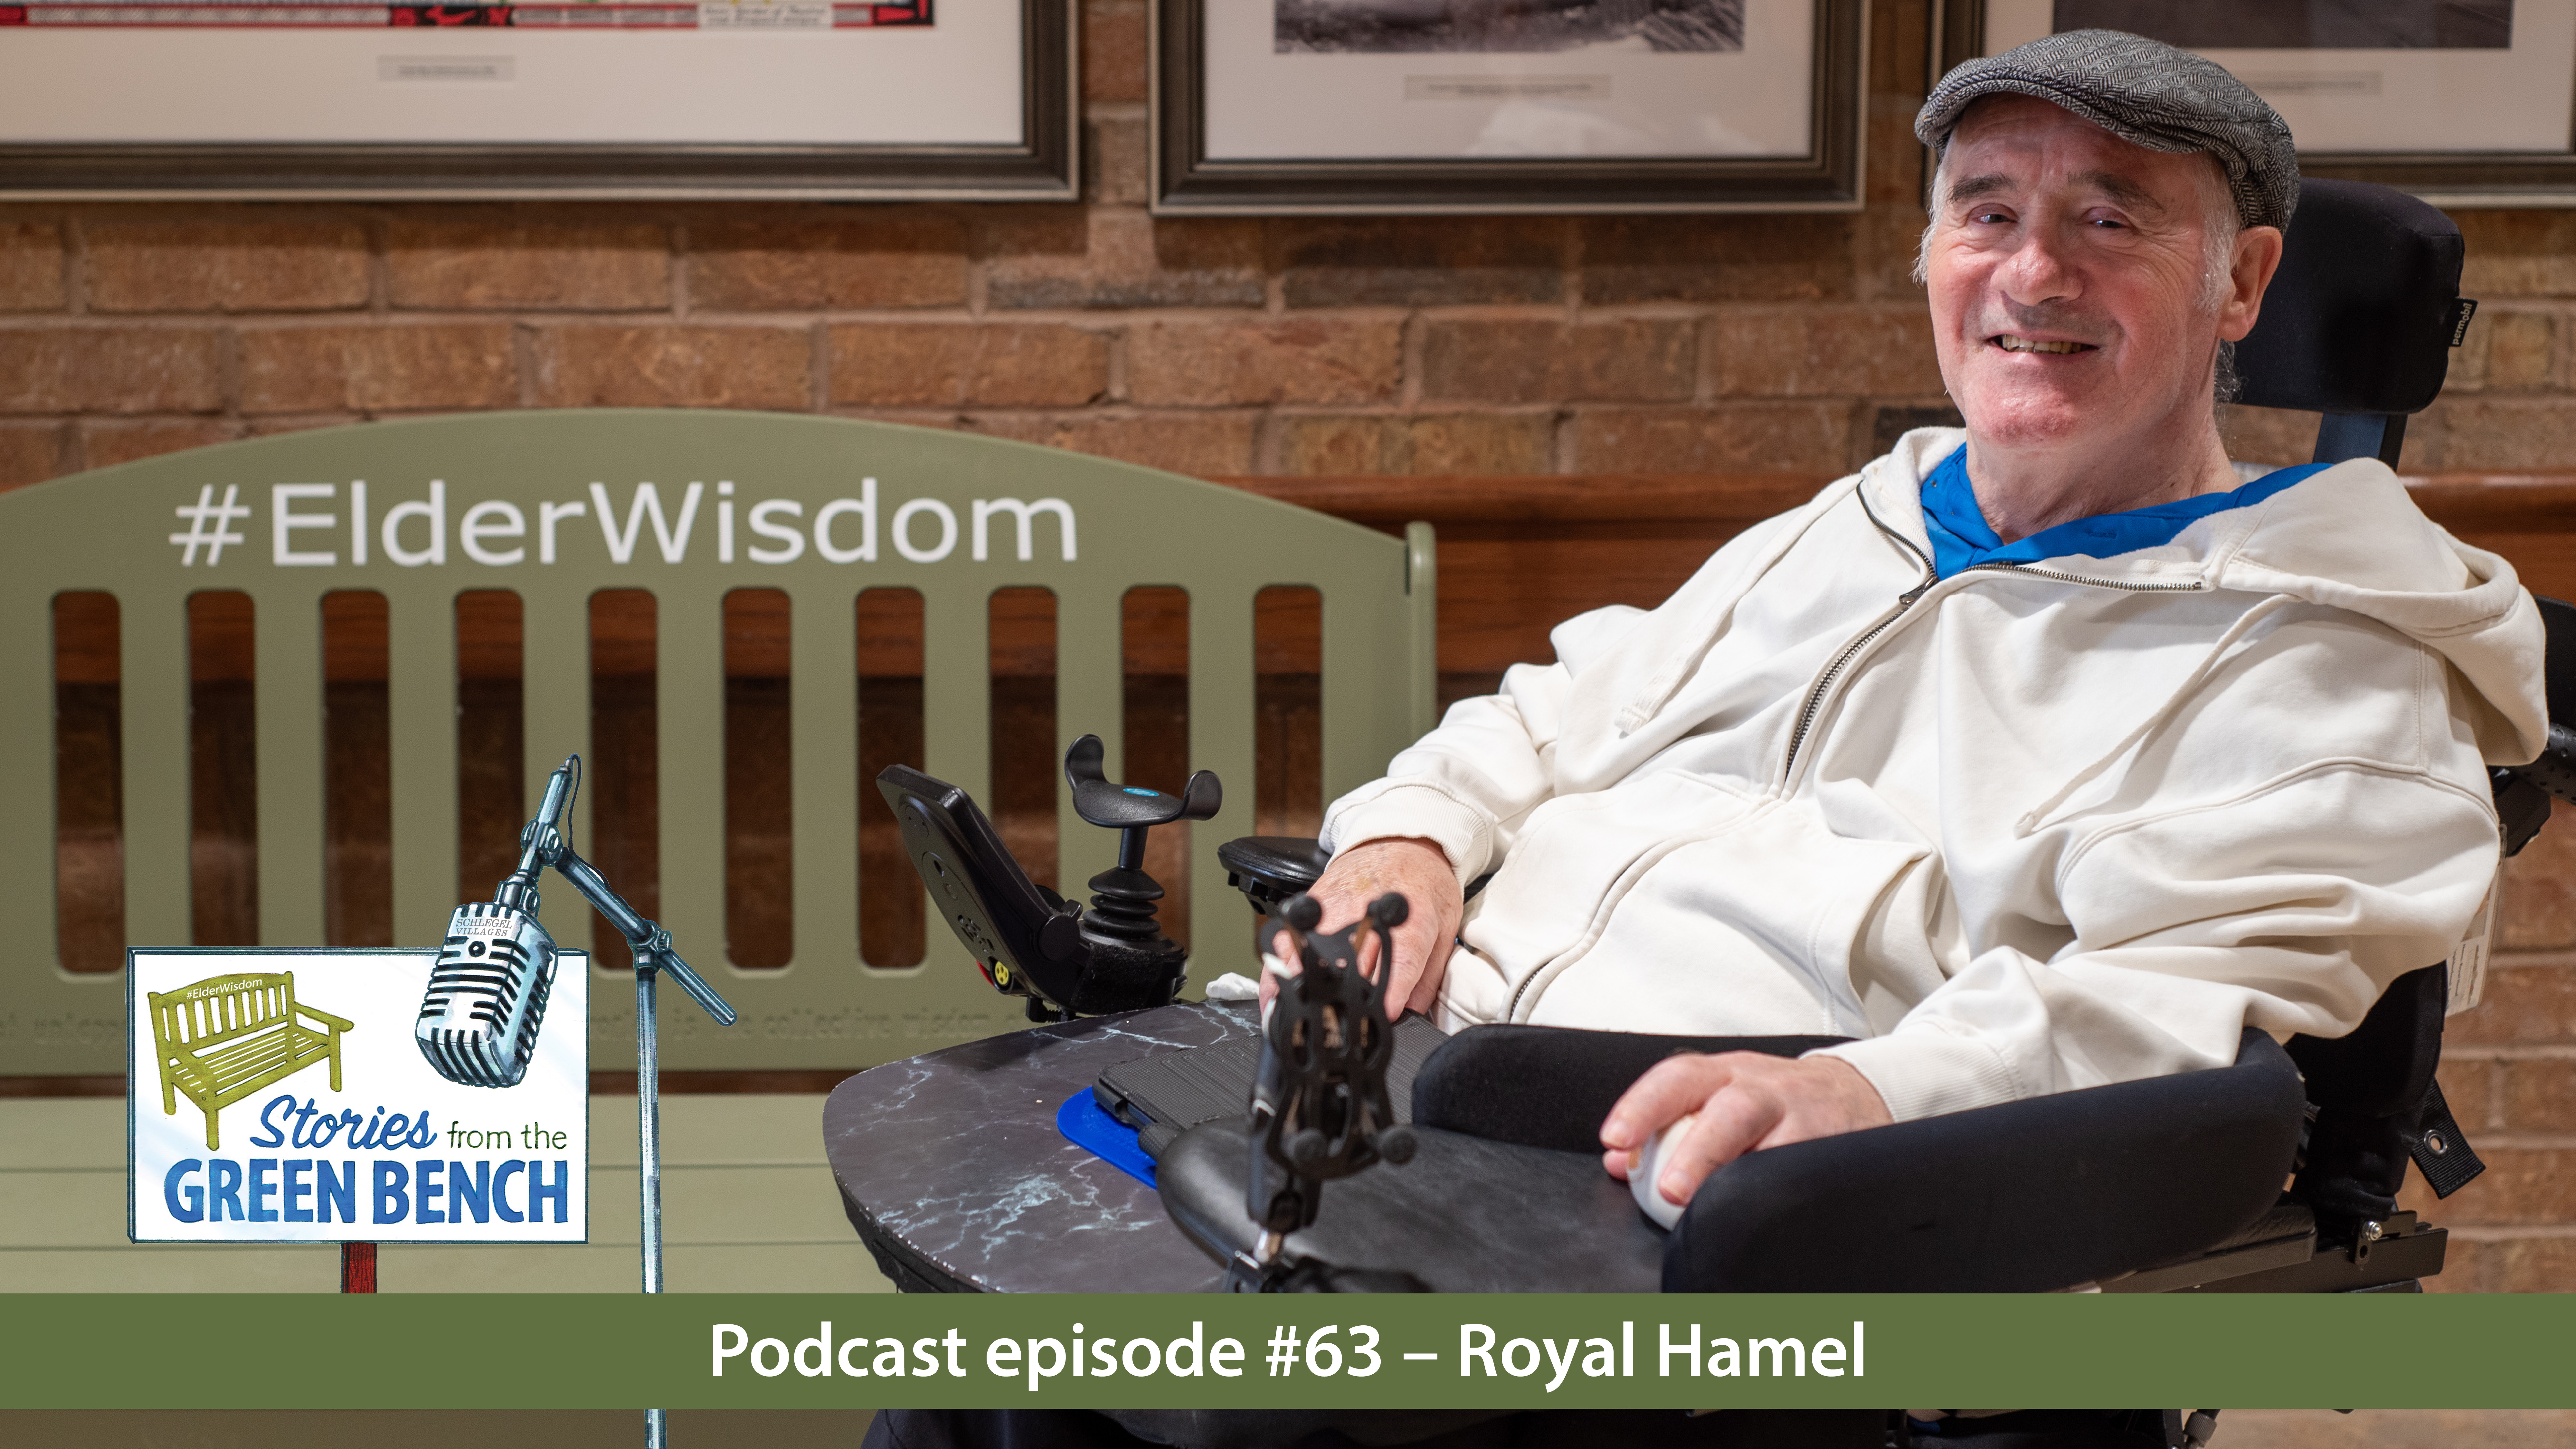 Royal Hamel sitting with the green #ElderWisdom bench in promotion of a podcast episode